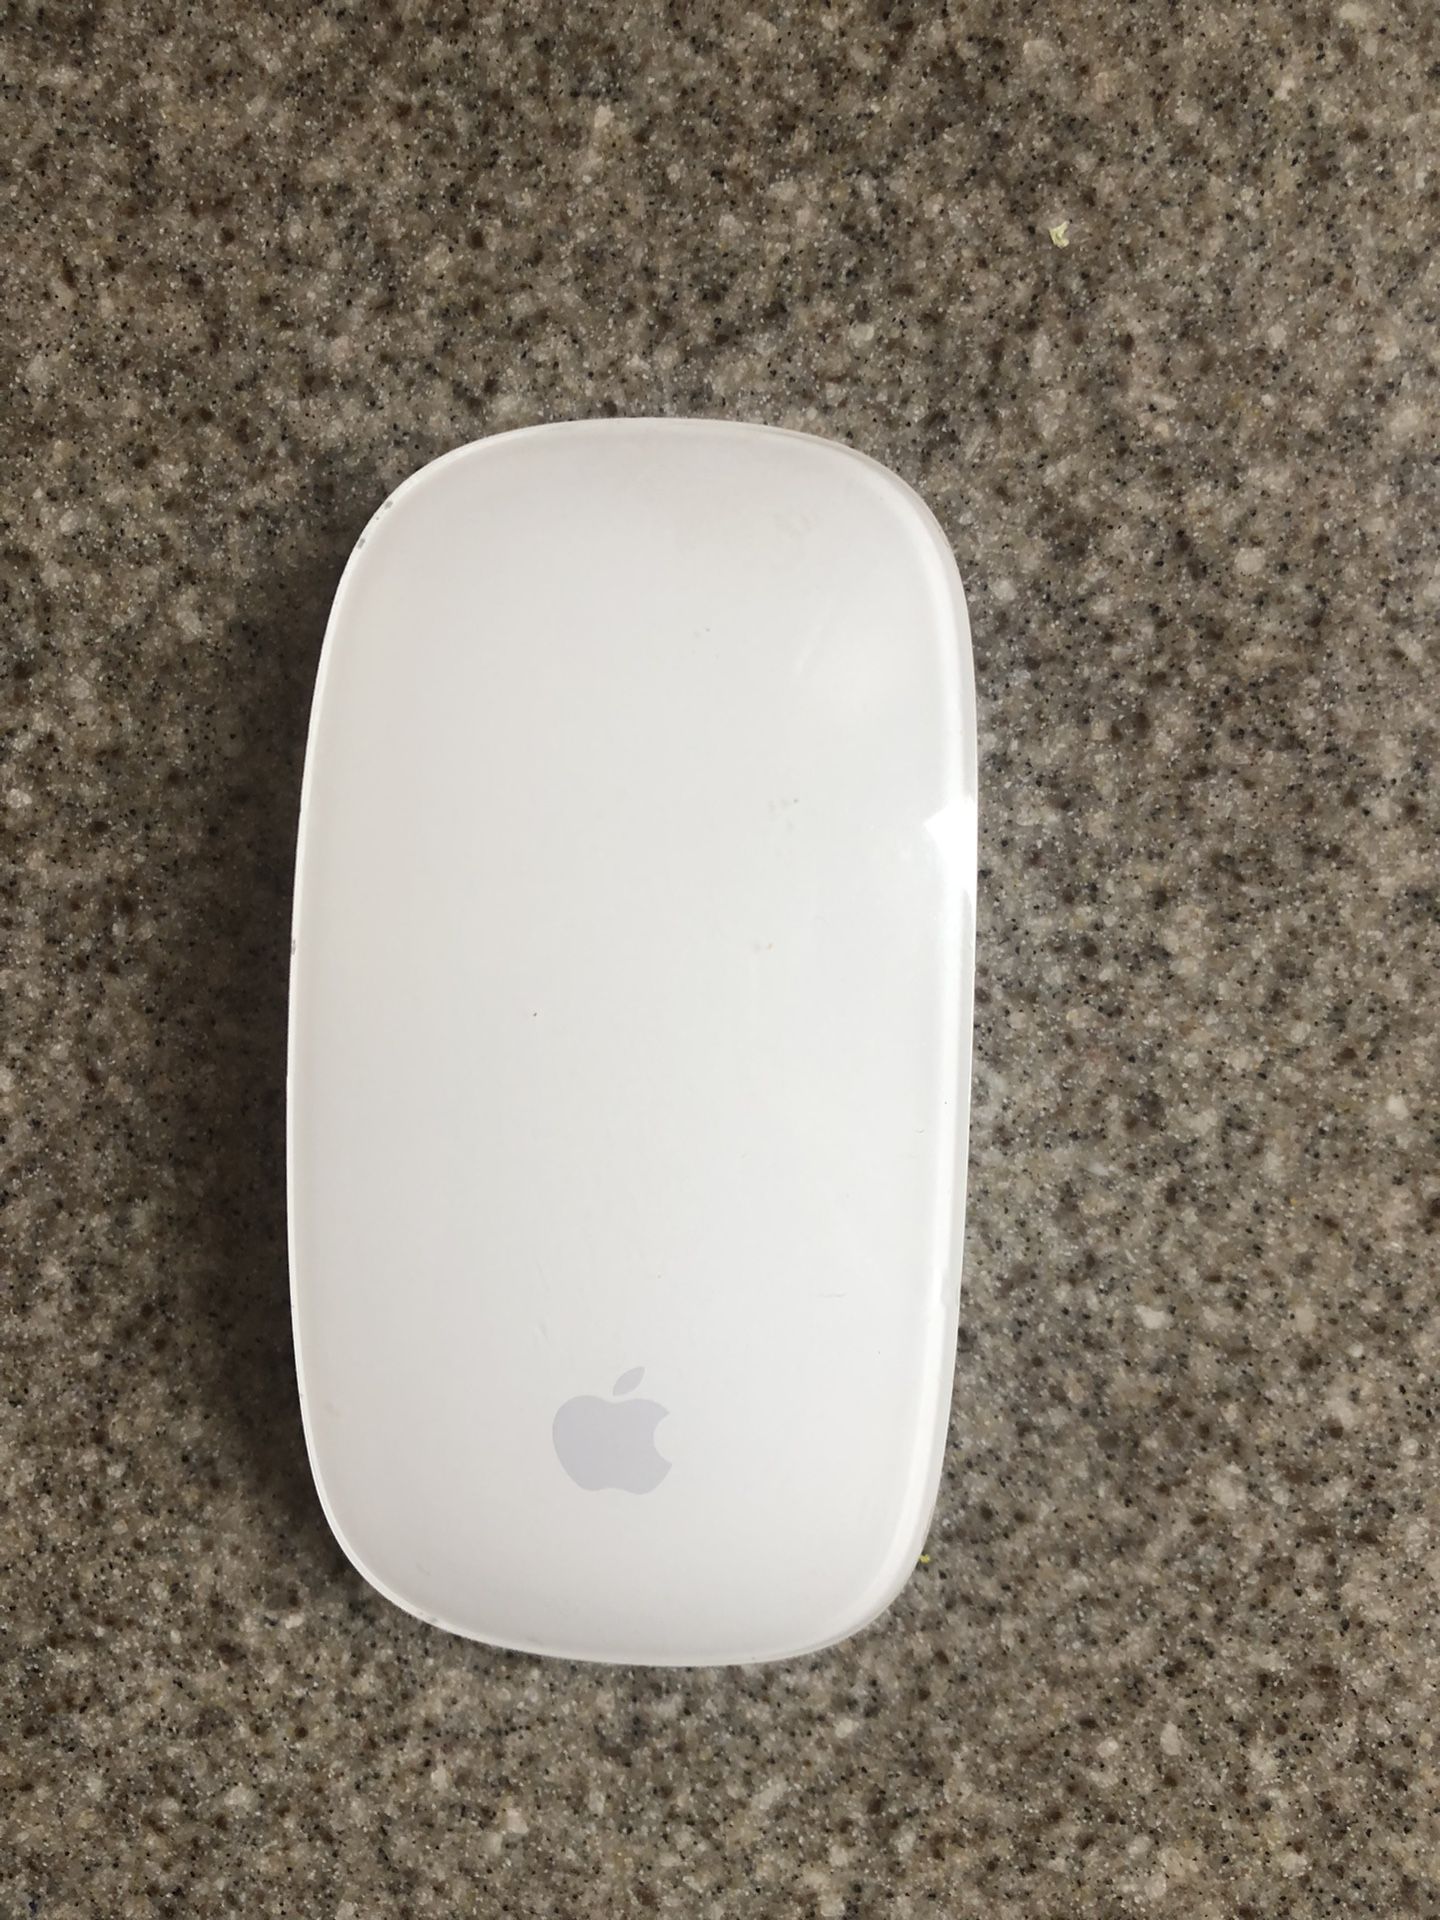 Wireless Apple mouse A1296 Blue Tooth - Like New 👍🏼  ‘ Magic Mouse ‘